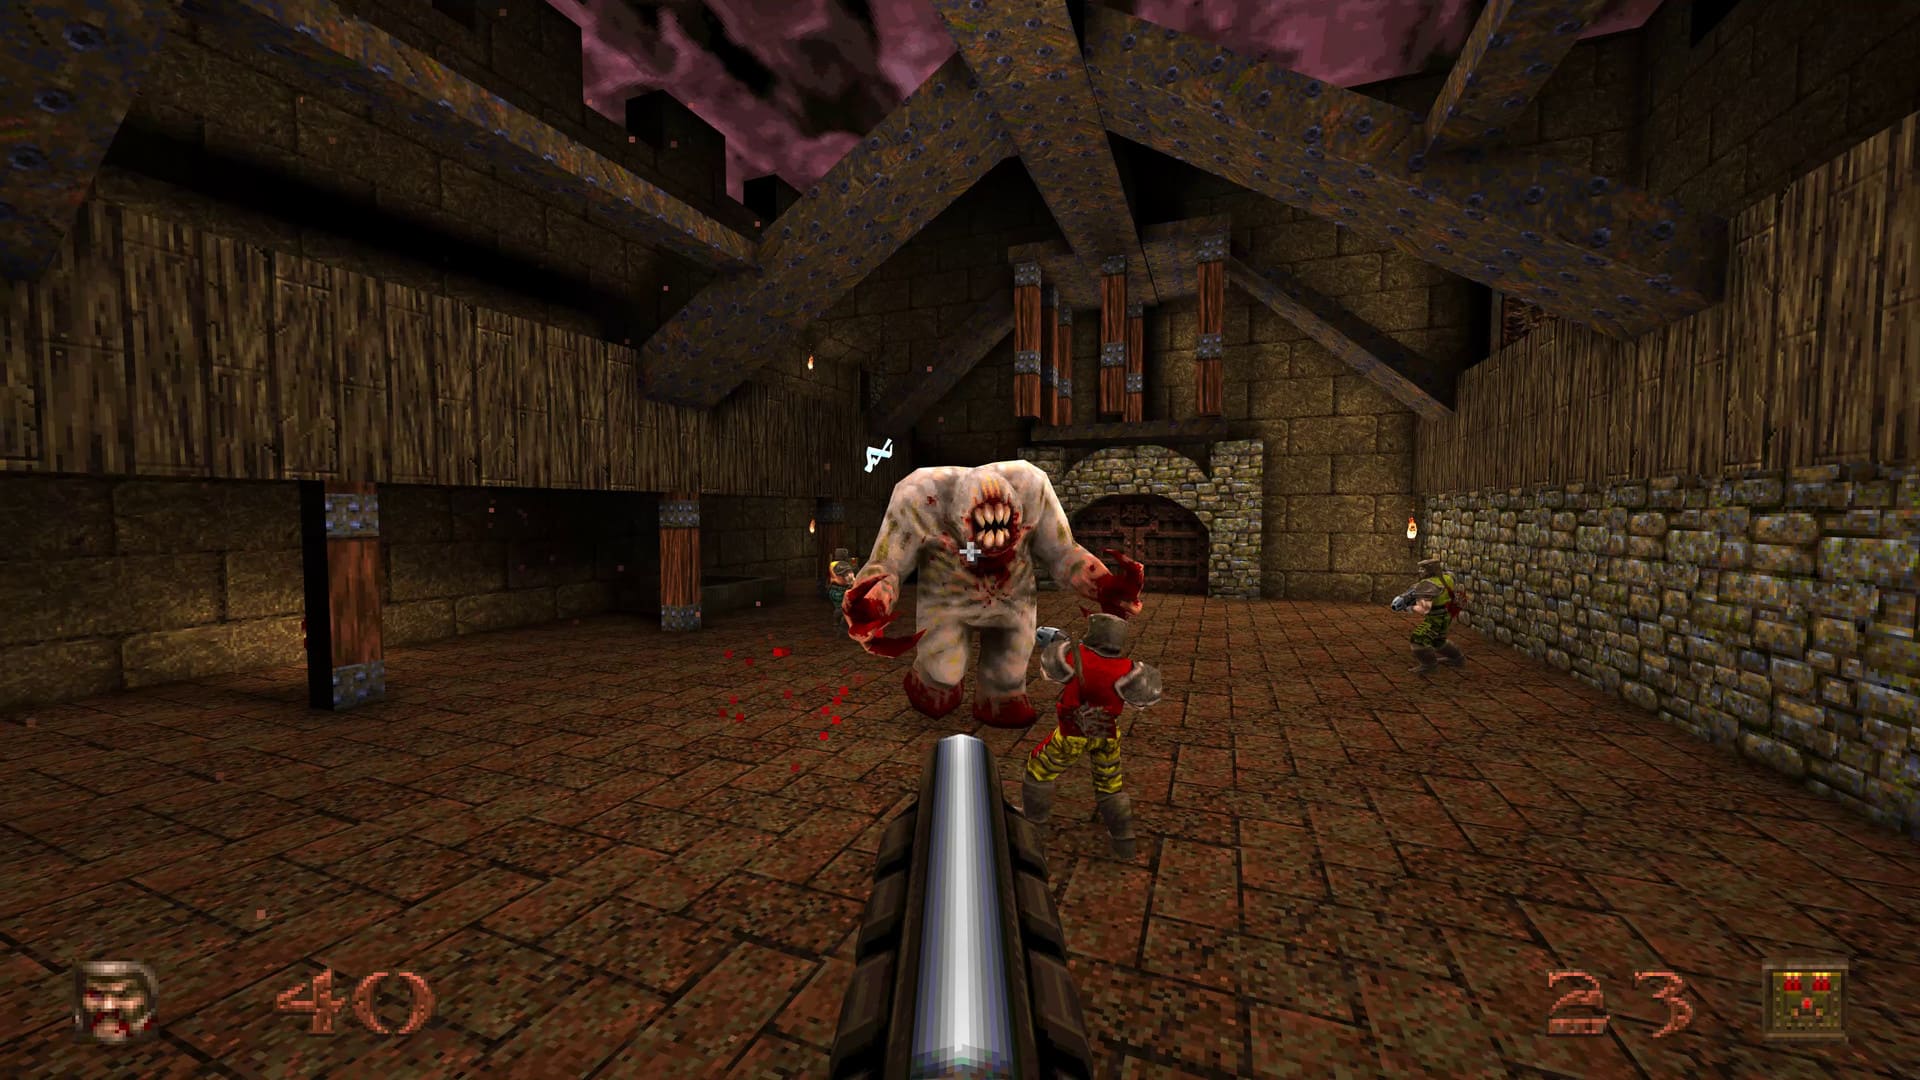 What I wouldn't give for a new Quake game | Source: Steam